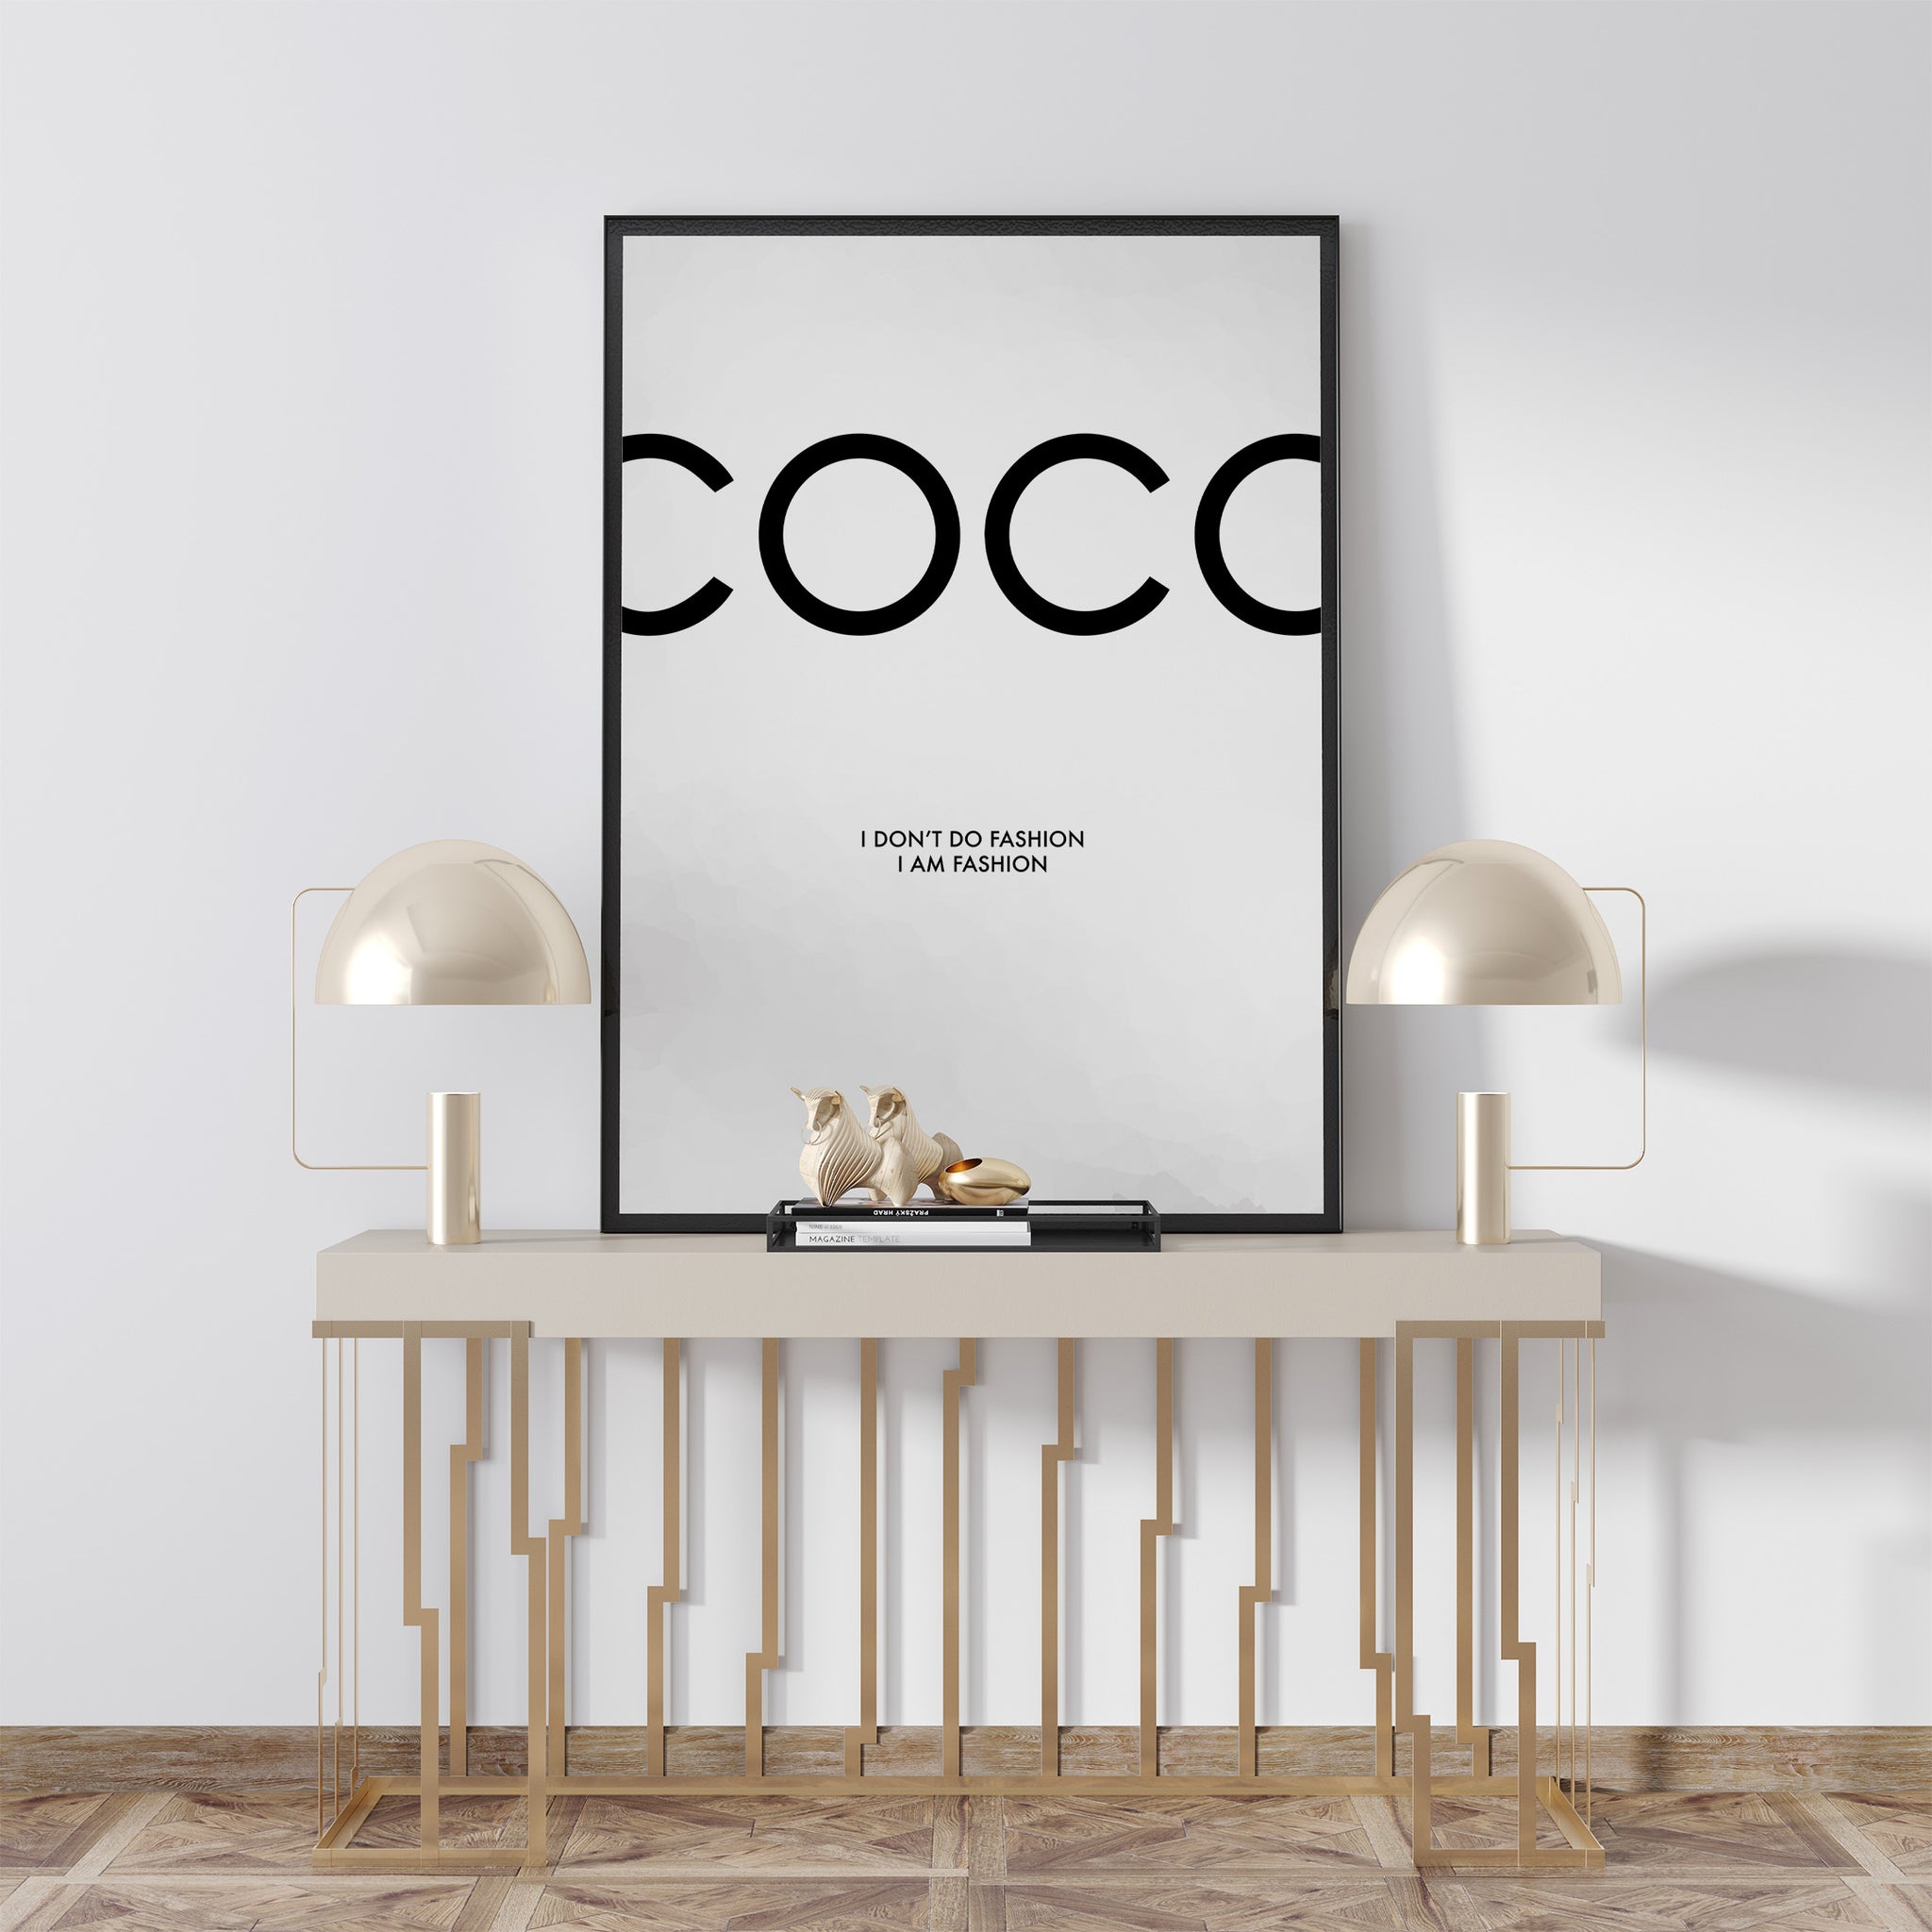 Coco Chanel Courageous Act Vintage Style Inspirational Quote Print. -  Echo-Lit